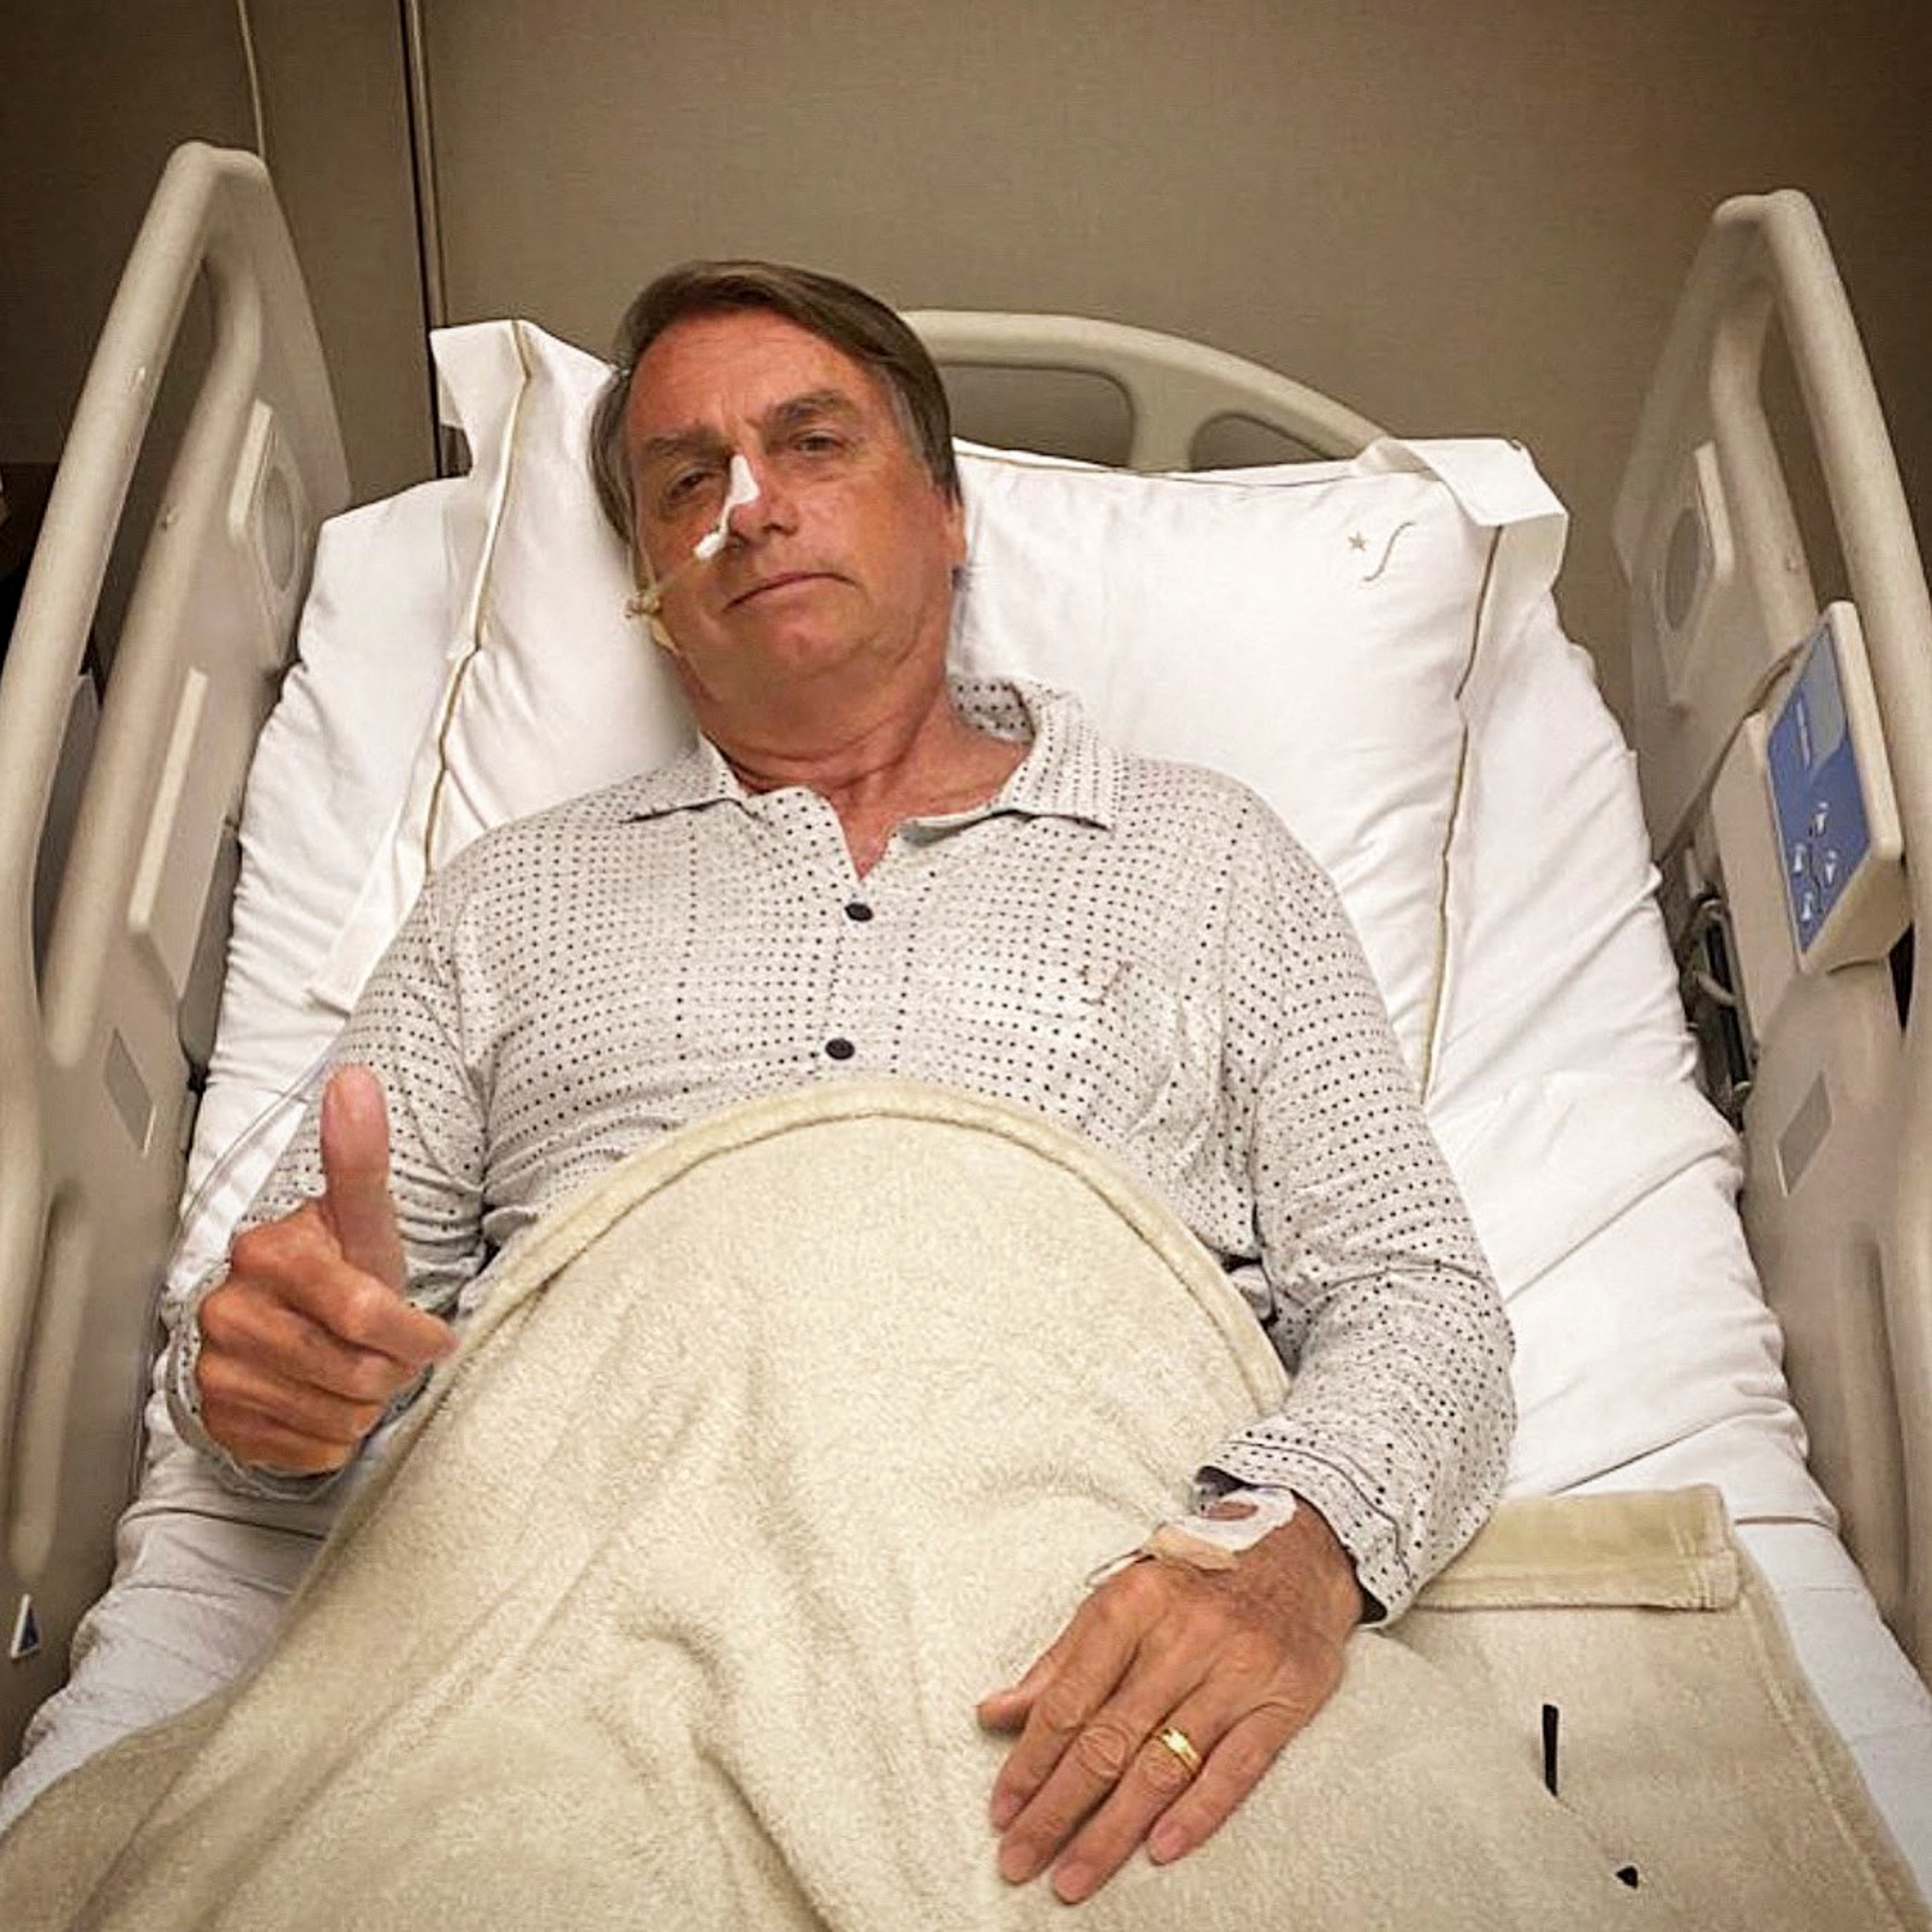 Brazil's President Jair Bolsonaro gestures while being hospitalized due to an intestinal blockage in Sao Paulo, Brazil January 3, 2022 in this picture obtained from social media. @jairbolsonaro via Twitter/via REUTERS  